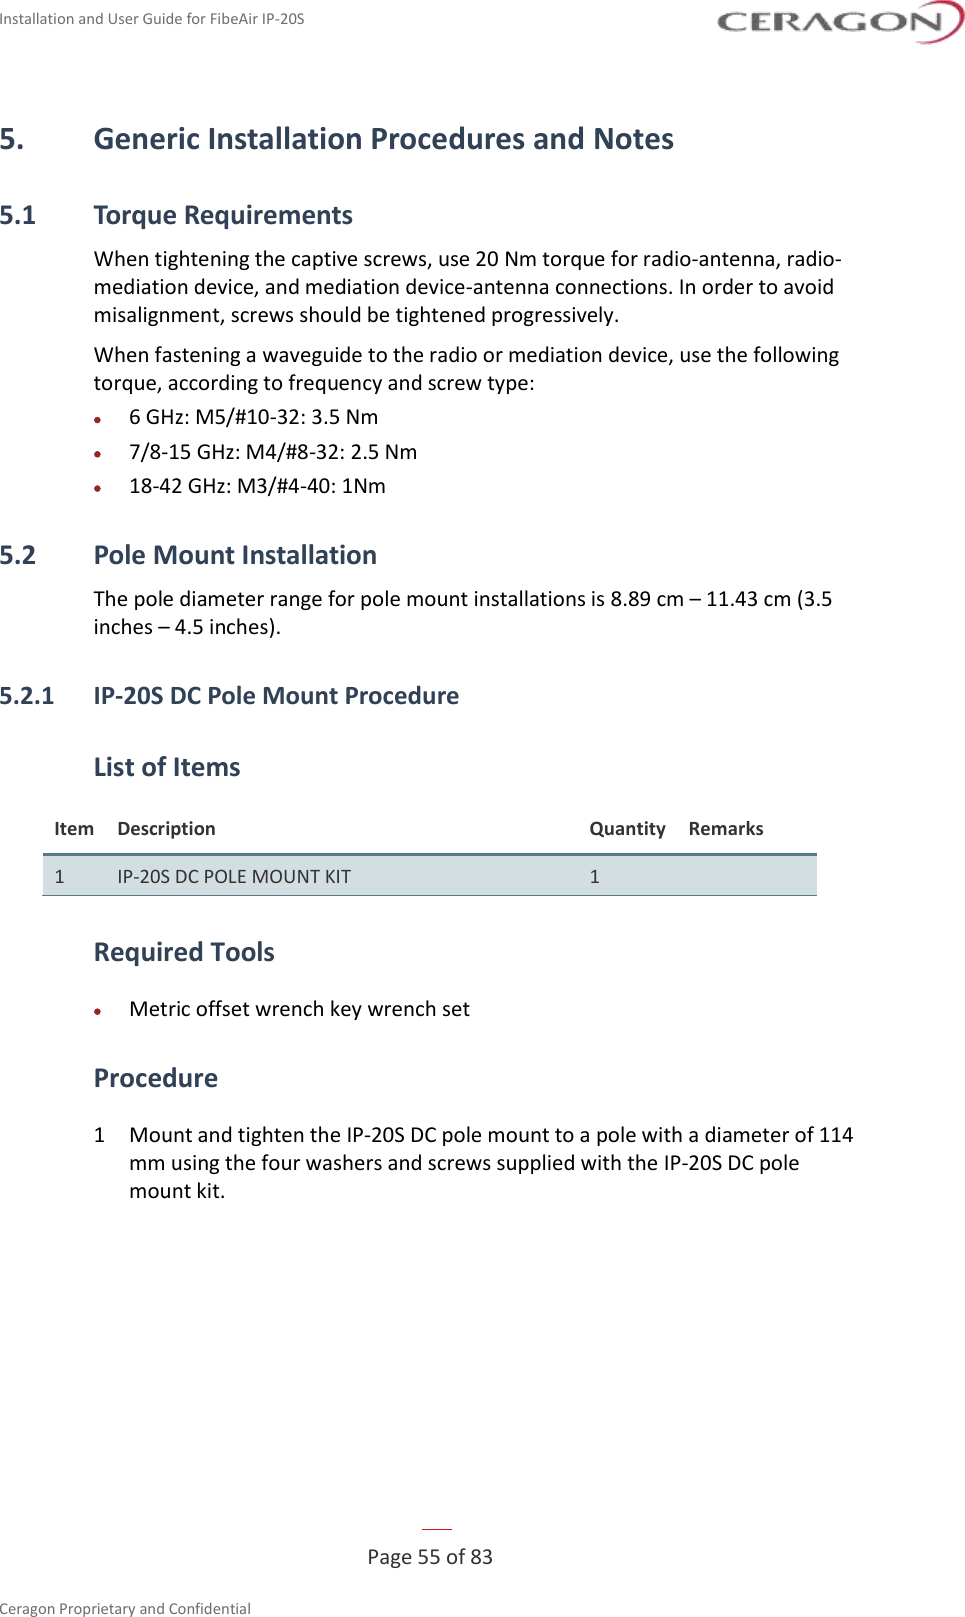 Installation and User Guide for FibeAir IP-20S   Page 55 of 83  Ceragon Proprietary and Confidential     5. Generic Installation Procedures and Notes 5.1 Torque Requirements When tightening the captive screws, use 20 Nm torque for radio-antenna, radio-mediation device, and mediation device-antenna connections. In order to avoid misalignment, screws should be tightened progressively. When fastening a waveguide to the radio or mediation device, use the following torque, according to frequency and screw type: • 6 GHz: M5/#10-32: 3.5 Nm • 7/8-15 GHz: M4/#8-32: 2.5 Nm • 18-42 GHz: M3/#4-40: 1Nm 5.2 Pole Mount Installation The pole diameter range for pole mount installations is 8.89 cm – 11.43 cm (3.5 inches – 4.5 inches). 5.2.1 IP-20S DC Pole Mount Procedure List of Items Item Description Quantity Remarks 1 IP-20S DC POLE MOUNT KIT 1  Required Tools • Metric offset wrench key wrench set Procedure 1  Mount and tighten the IP-20S DC pole mount to a pole with a diameter of 114 mm using the four washers and screws supplied with the IP-20S DC pole mount kit. 